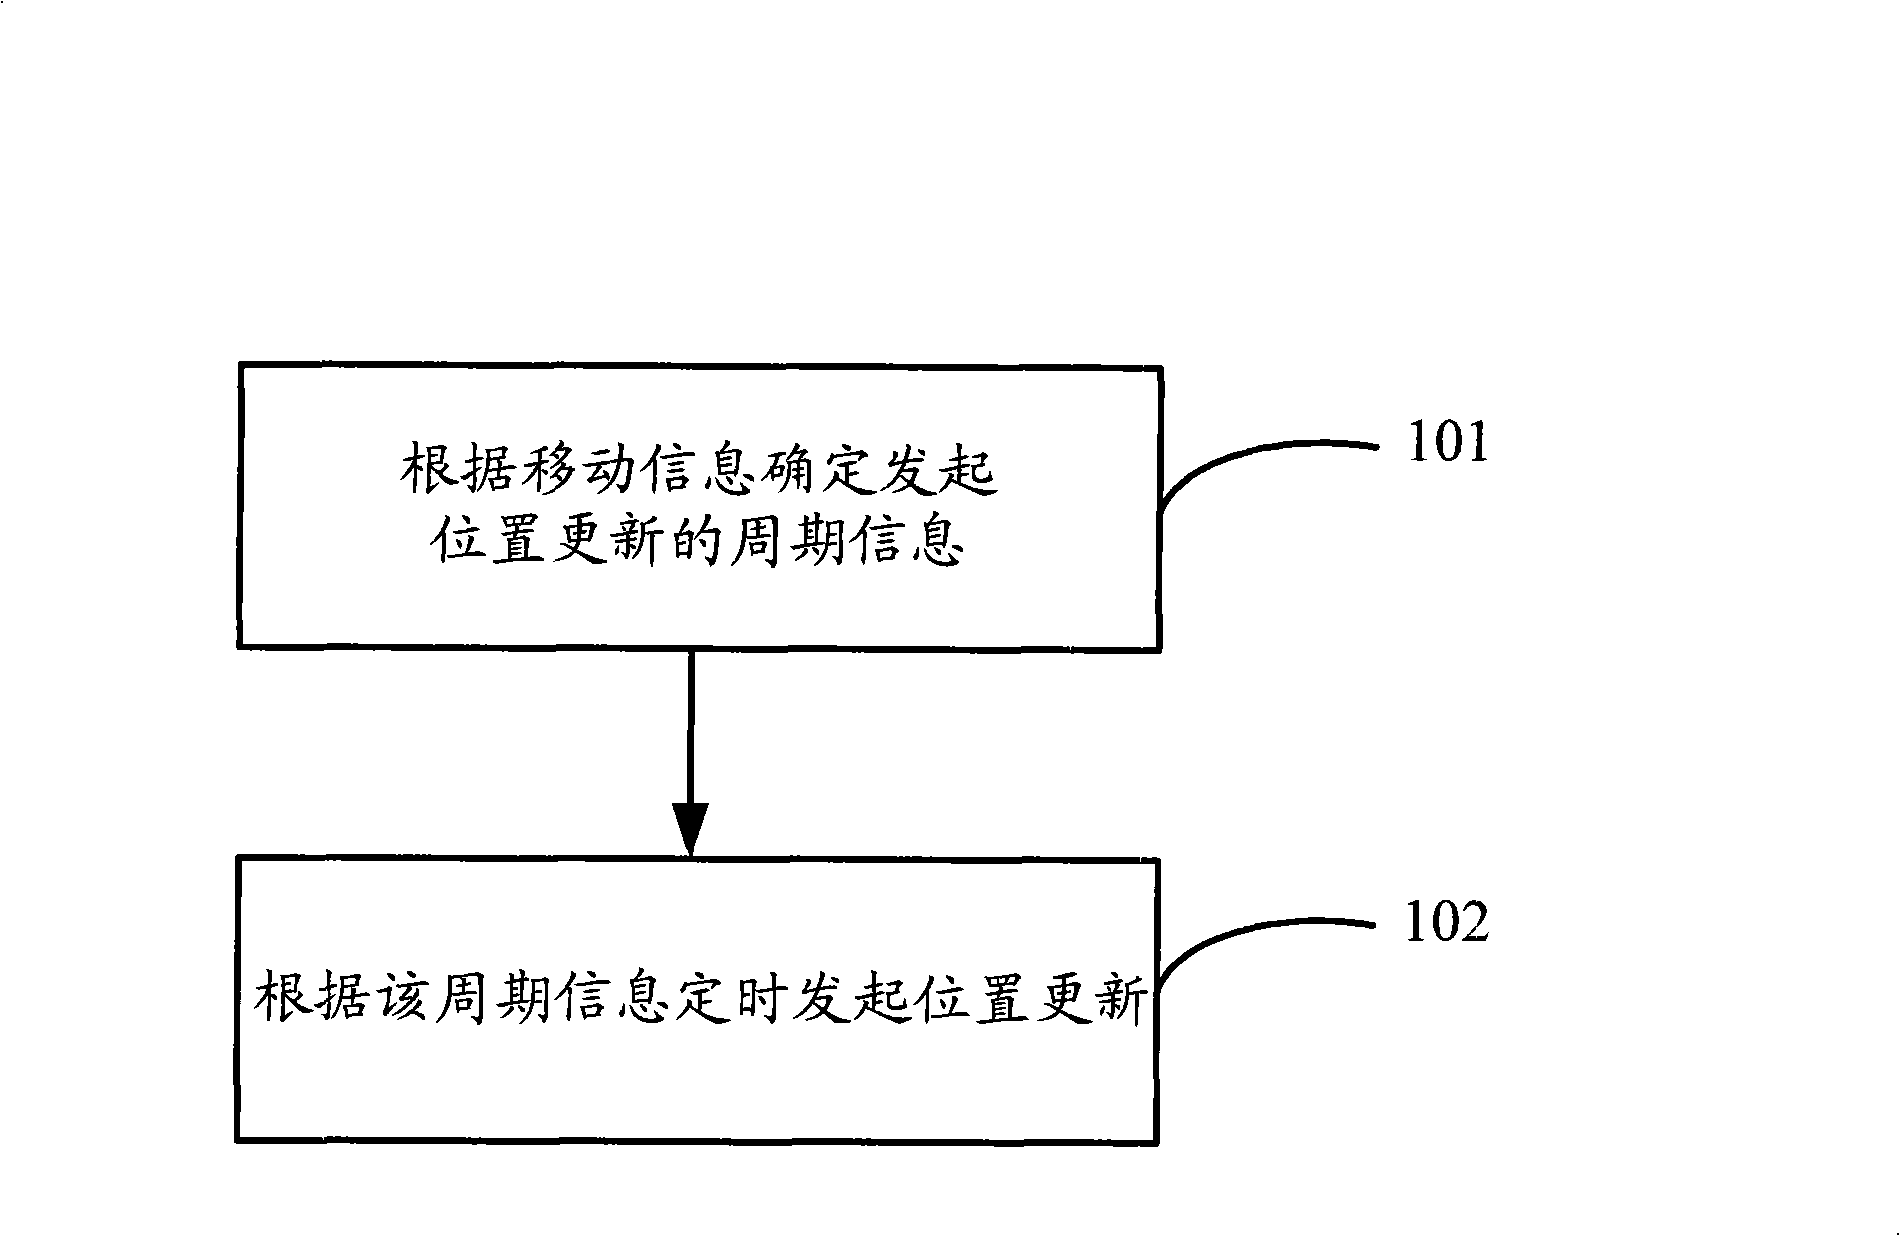 Method and apparatus for updating launch position